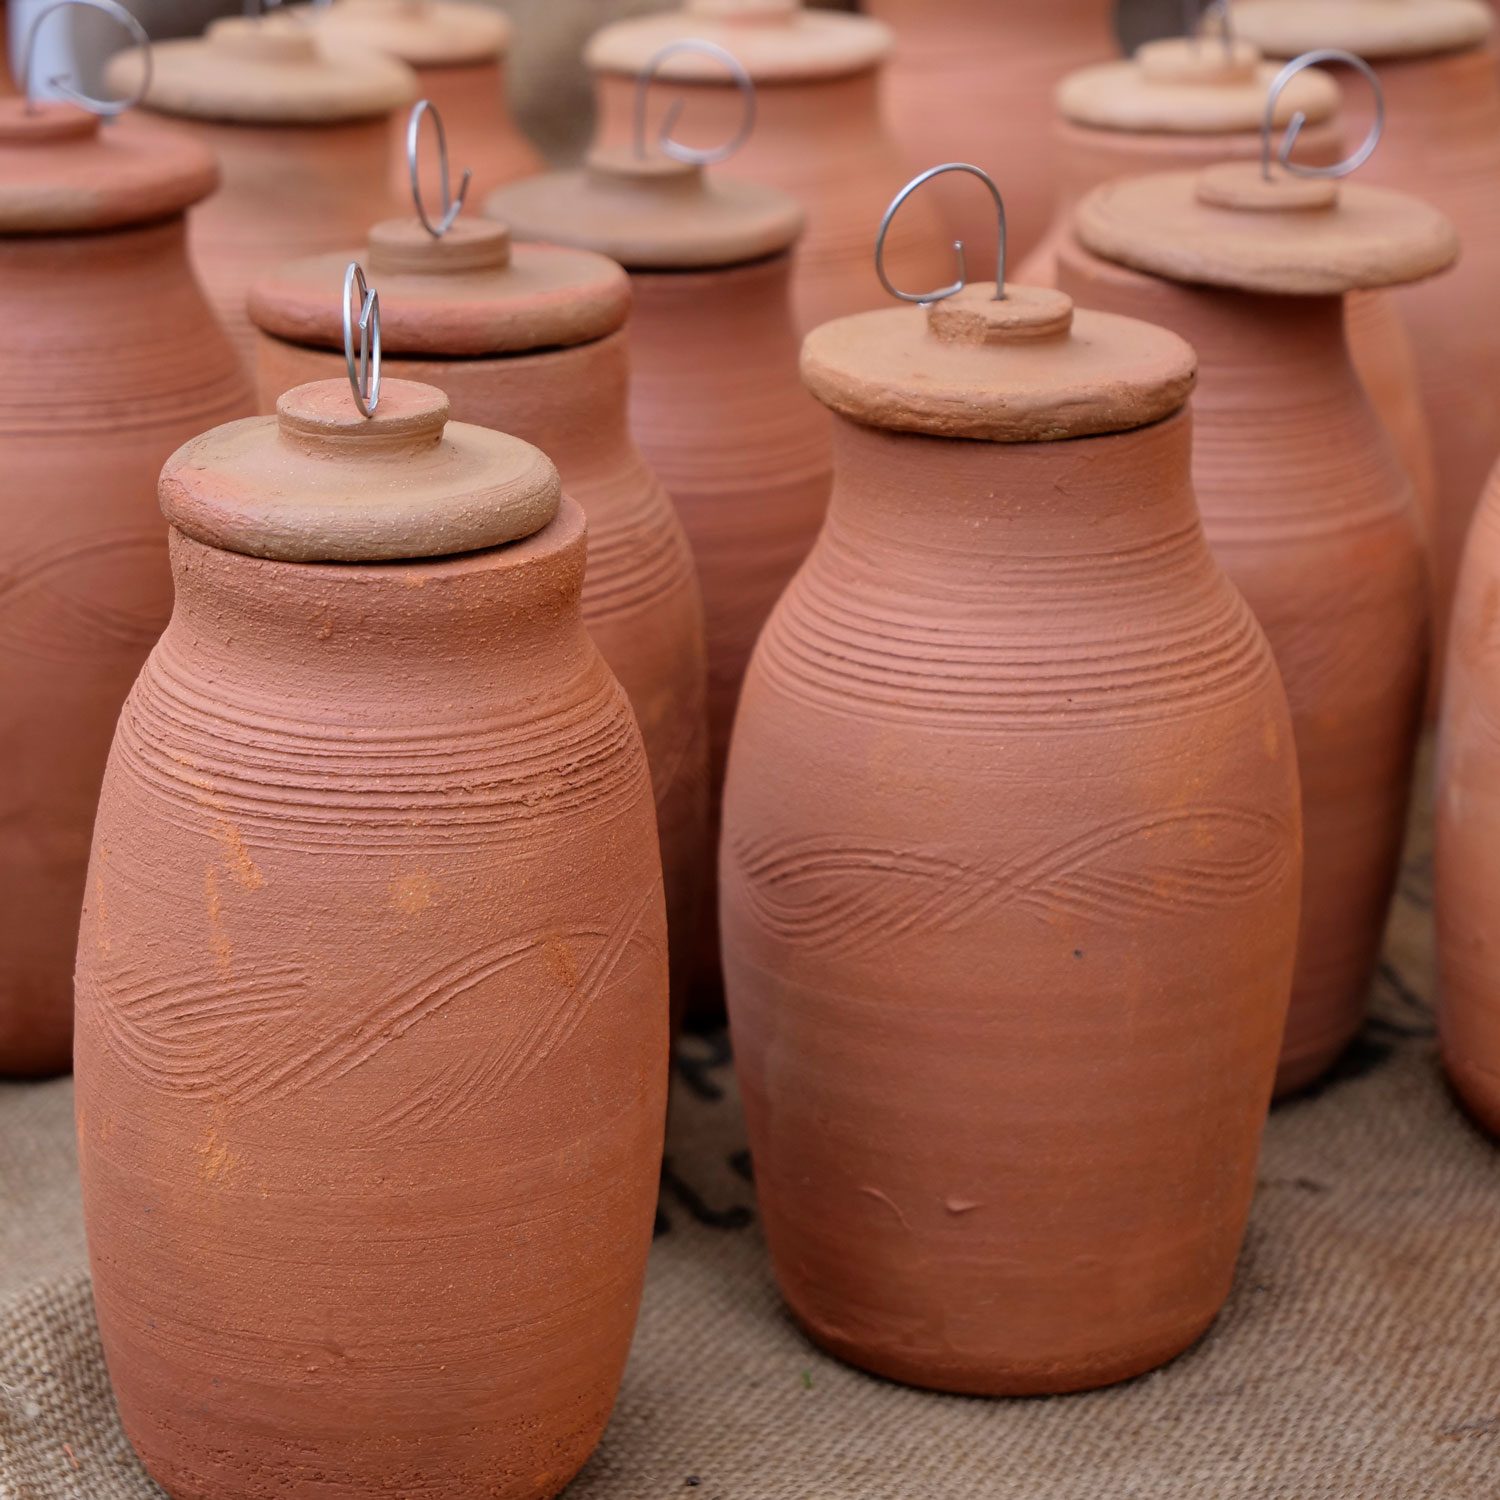 https://www.familyhandyman.com/wp-content/uploads/2023/10/Getty-1487947395-Resize-Crop-DH-FHM-Ancient-Terracotta-Olla-Pot-Watering-System.jpg